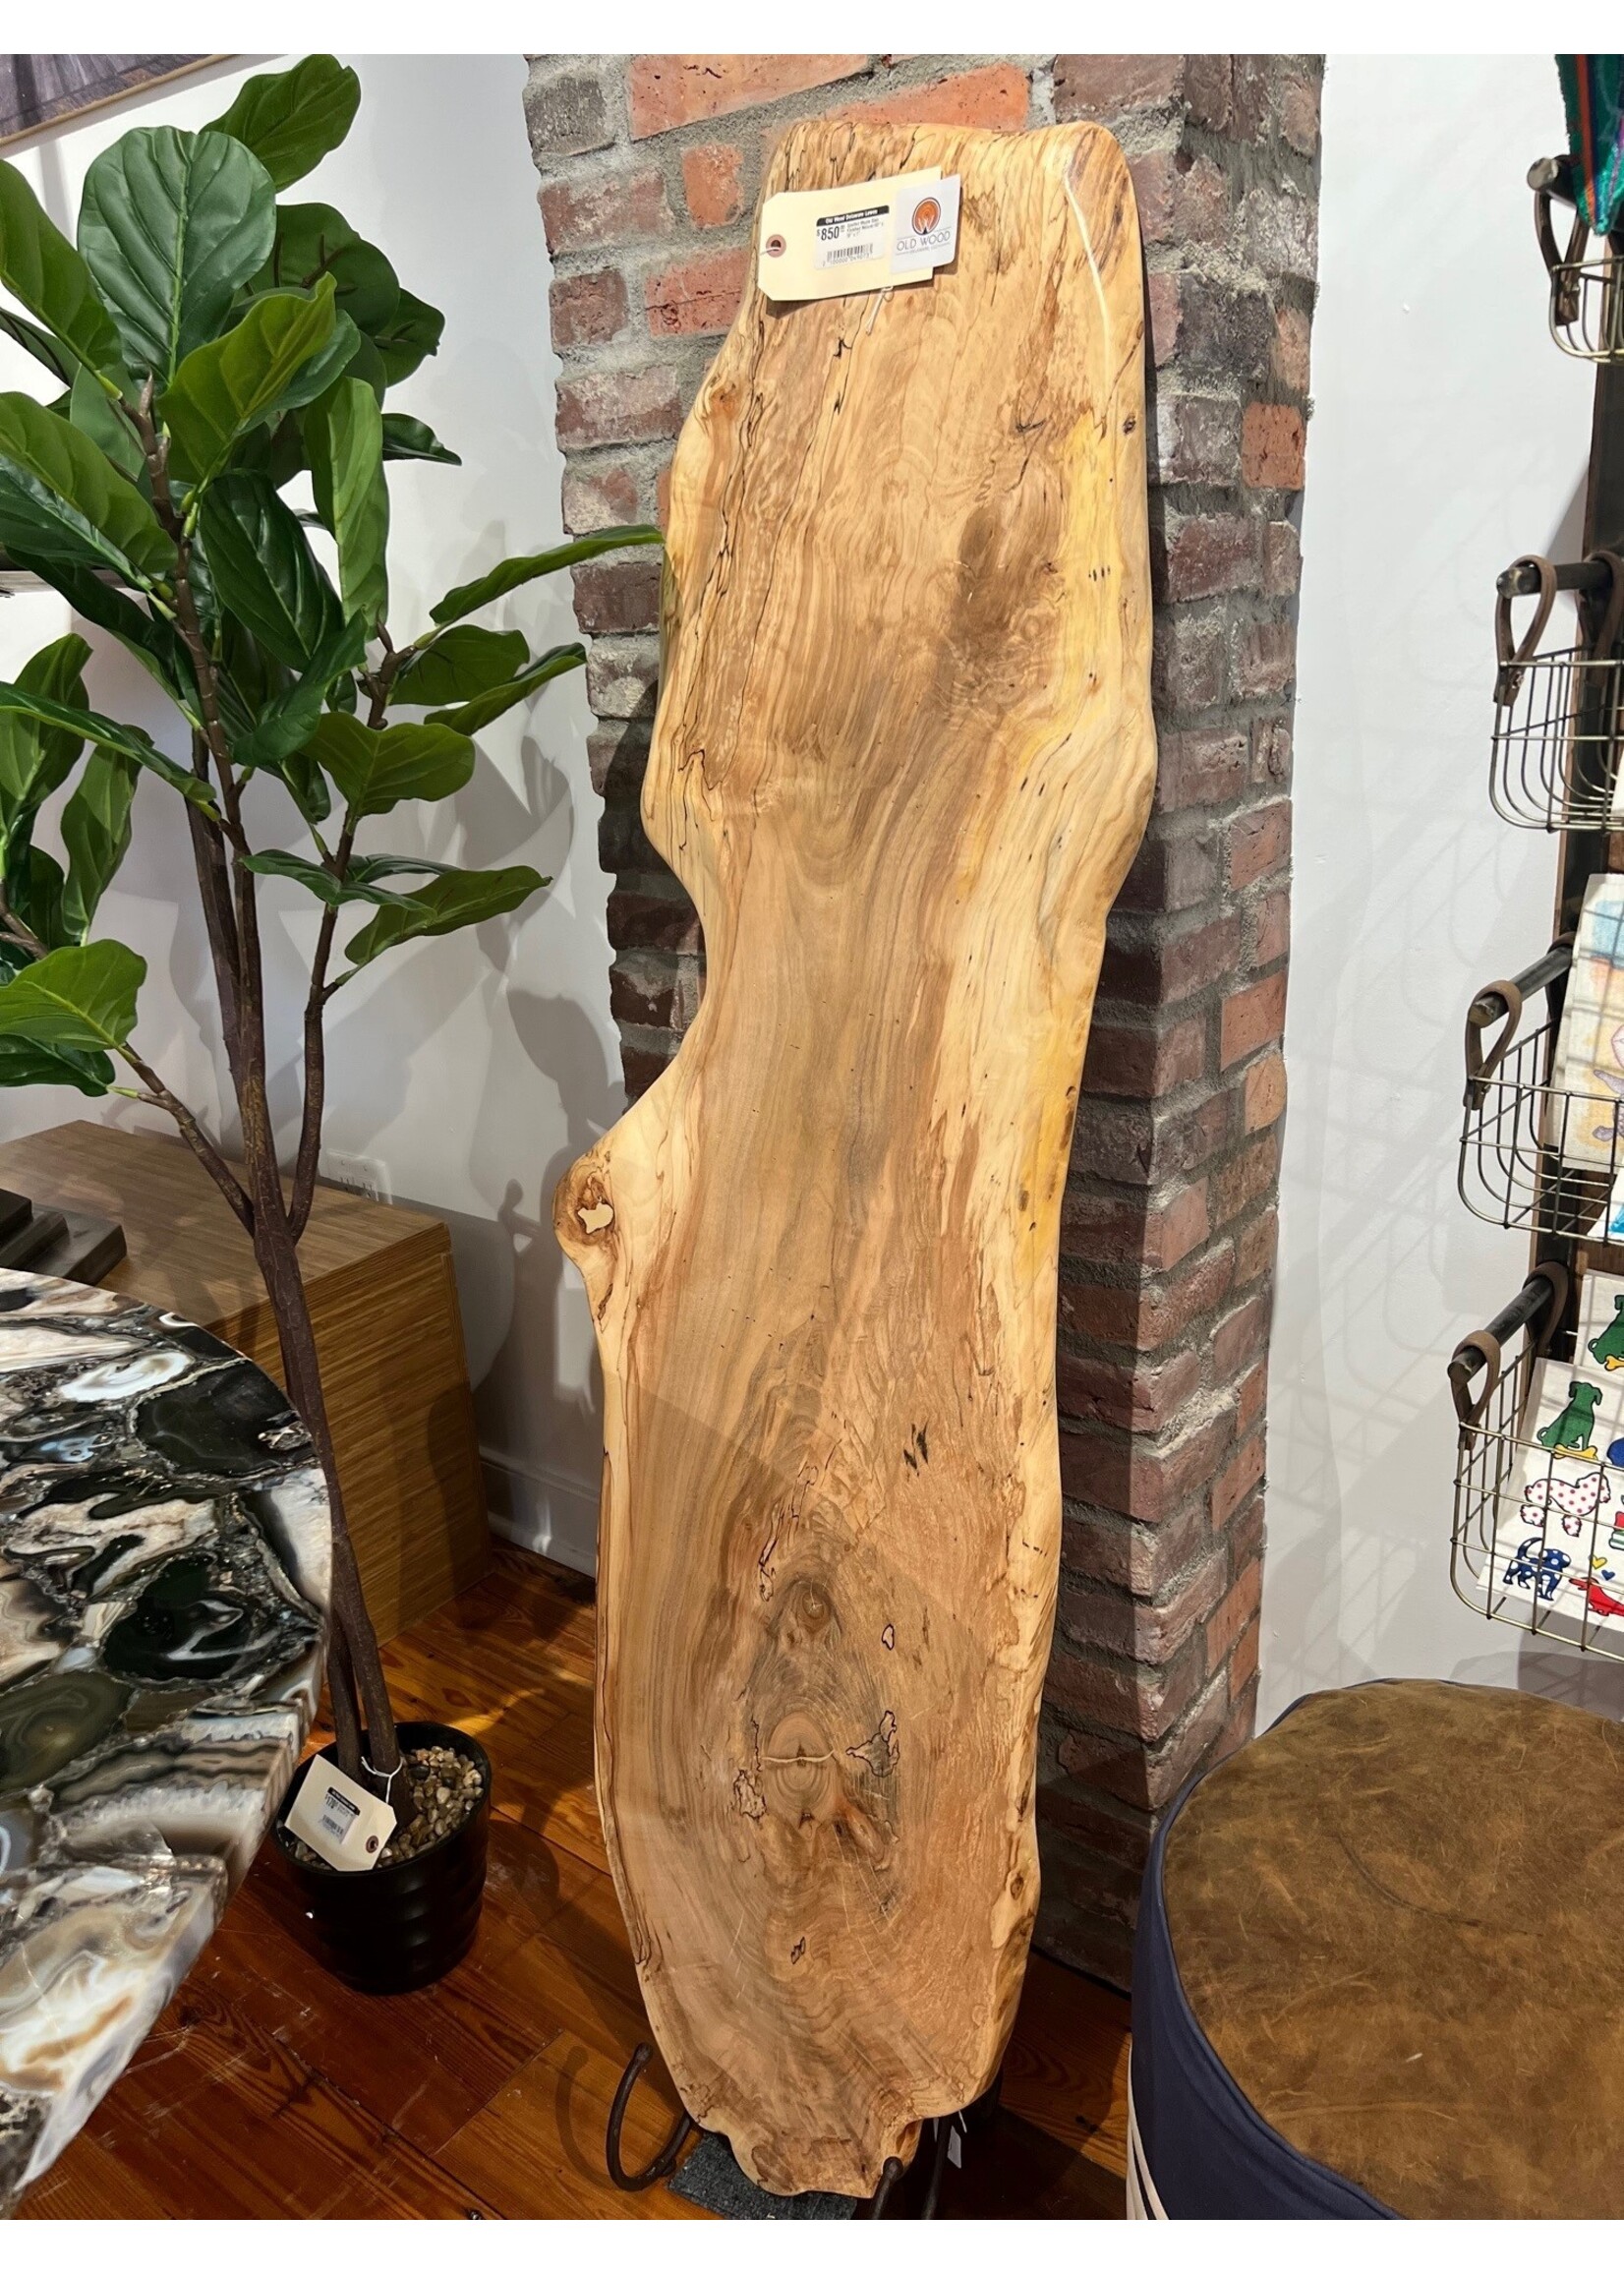 Old Wood Delaware Spalted Maple Slab Finished Natural 60" x 18" x 1"